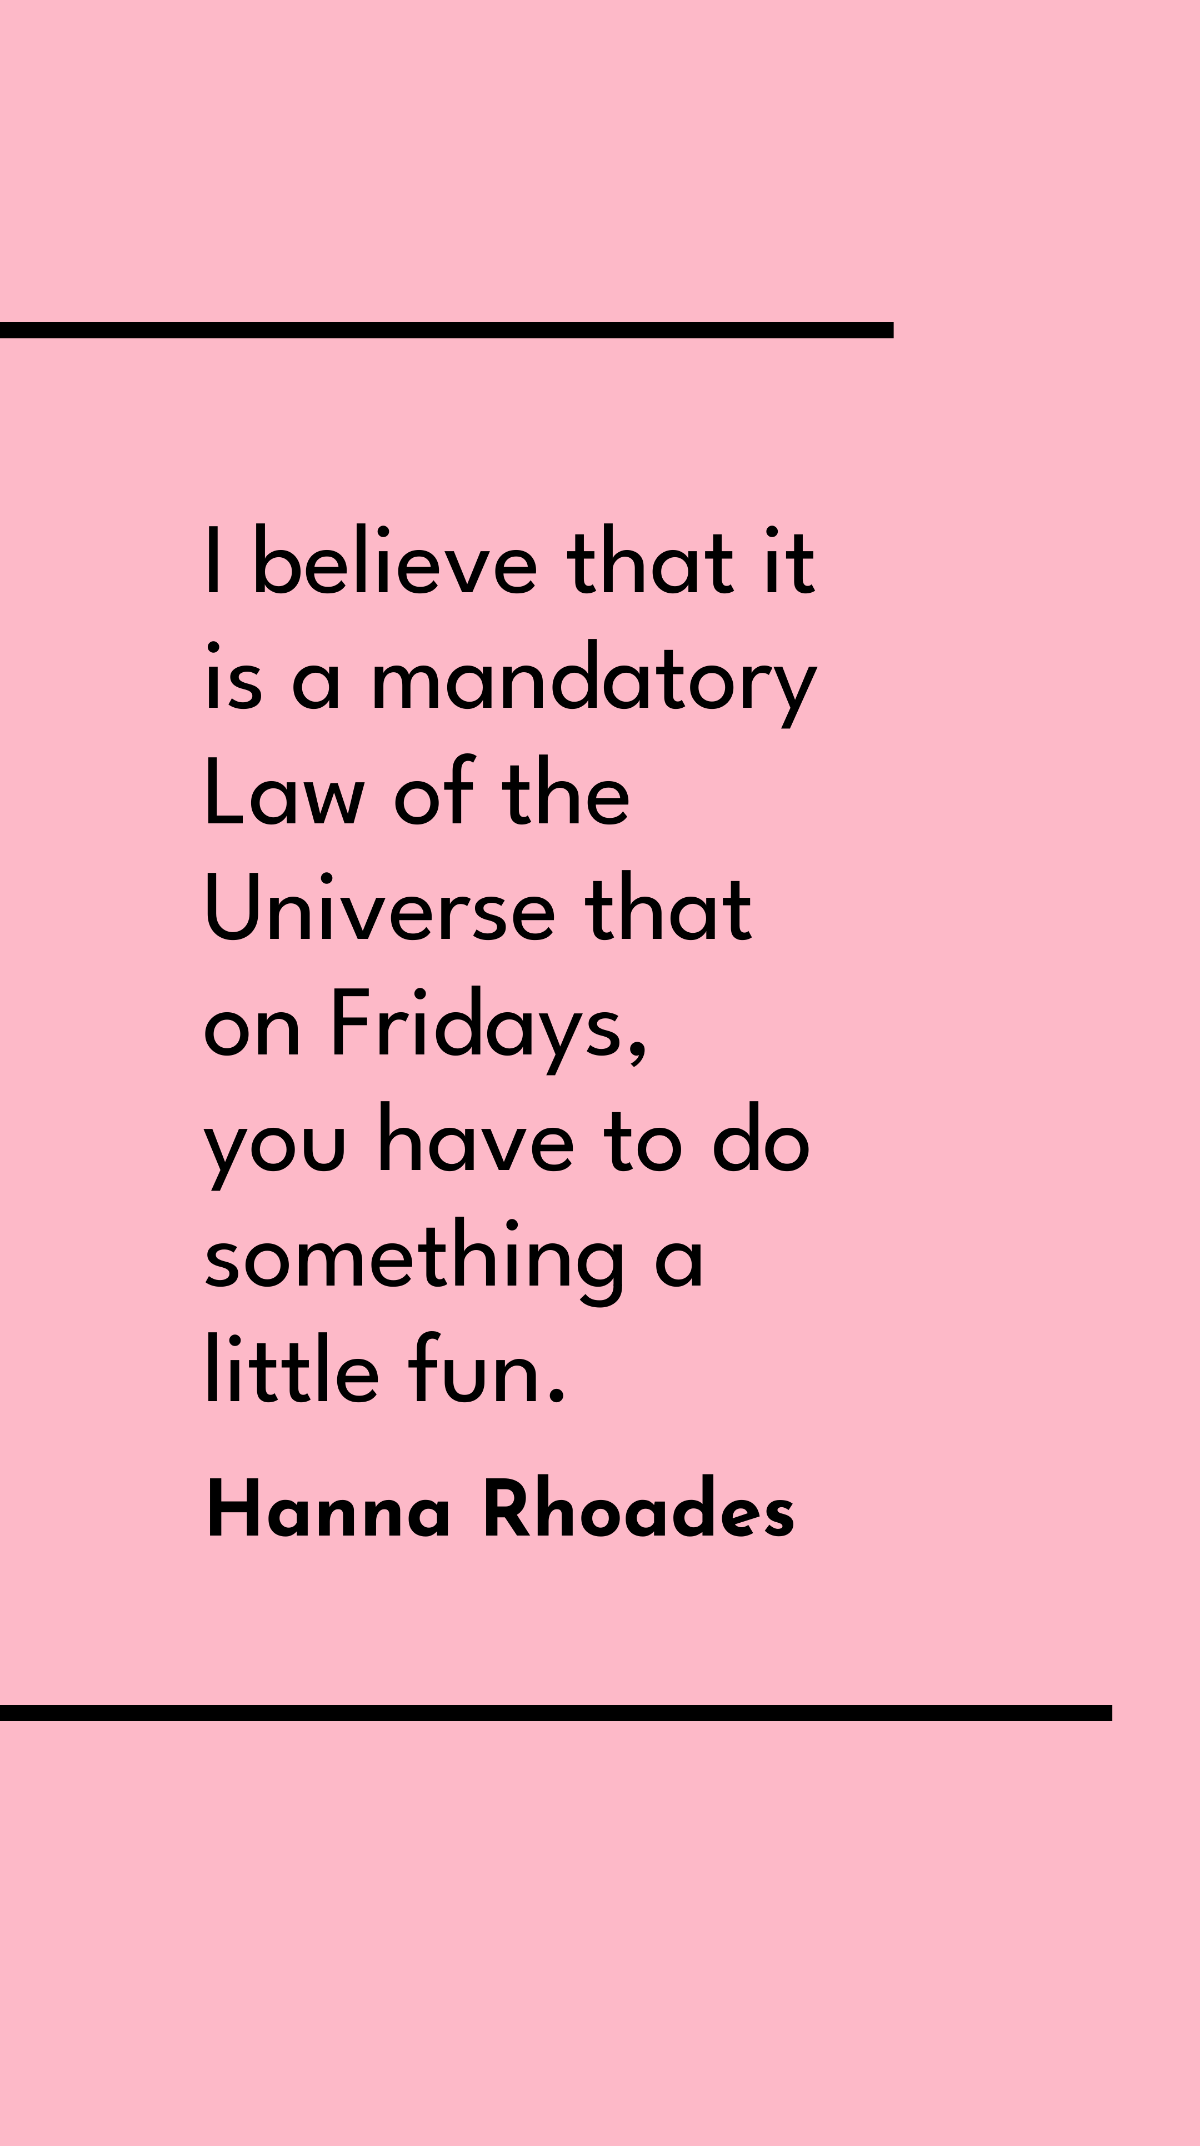 Hanna Rhoades - I believe that it is a mandatory Law of the Universe that on Fridays, you have to do something a little fun. 